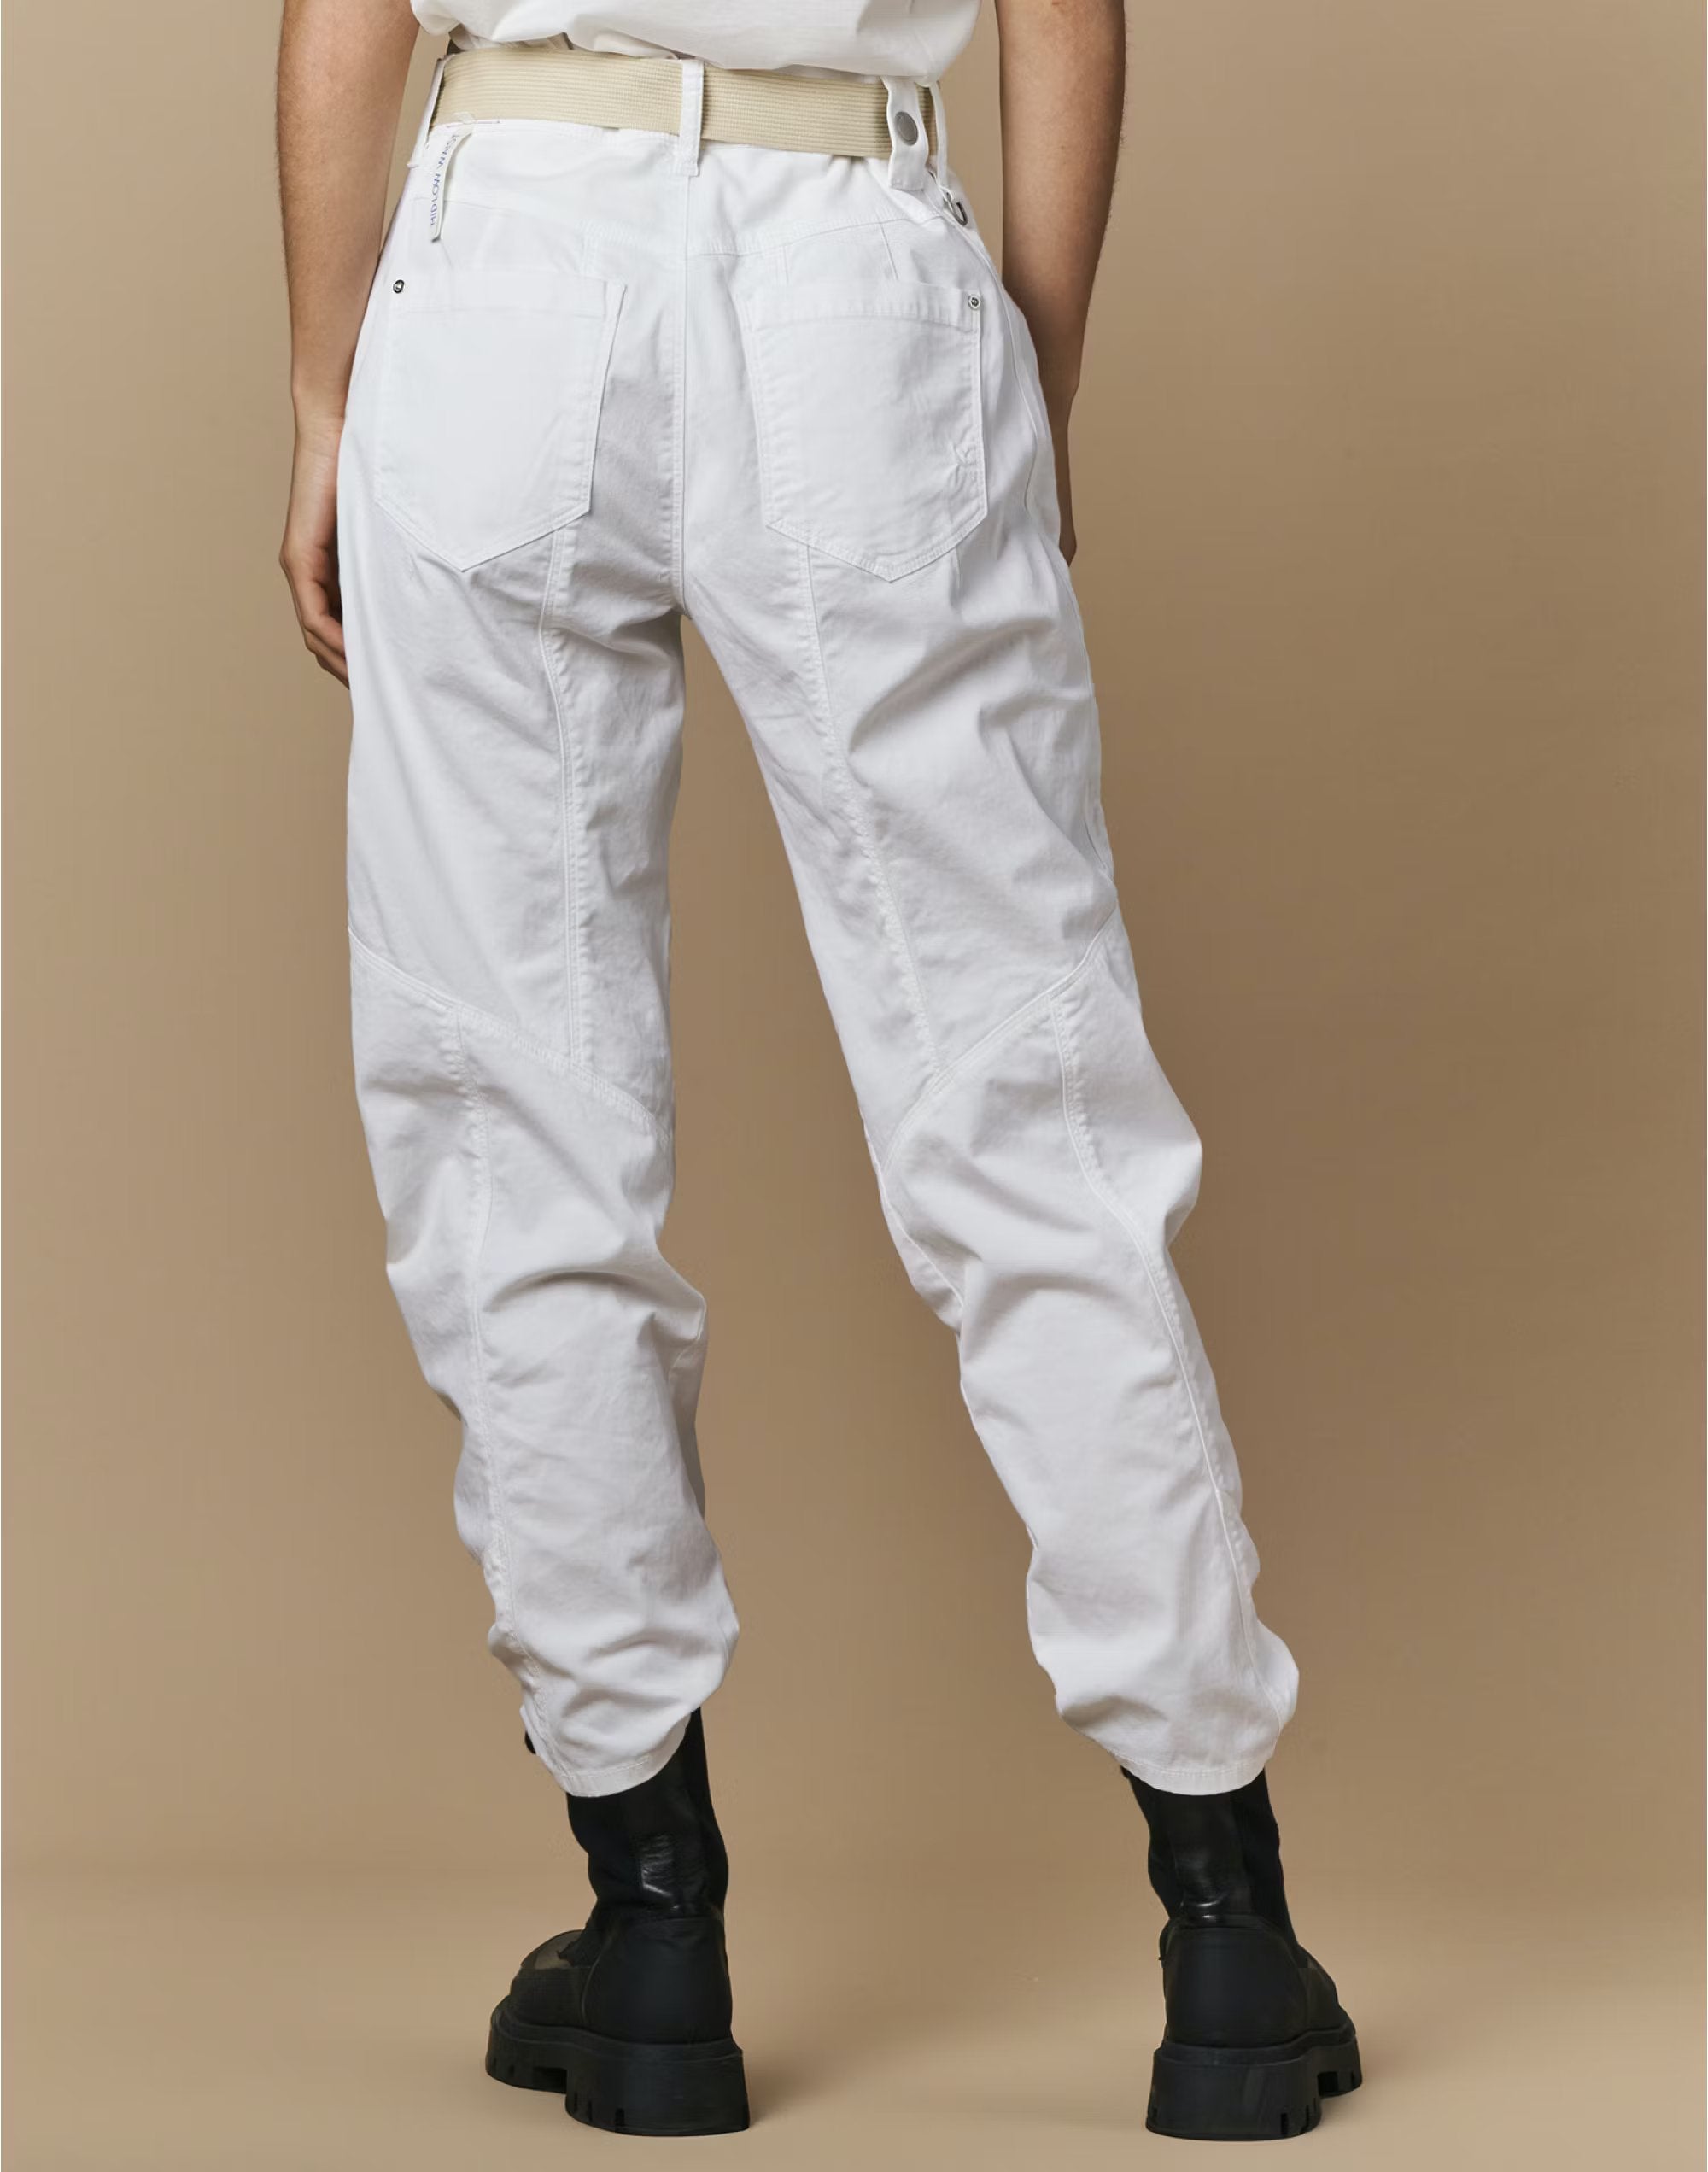 Pulsate ivory trousers